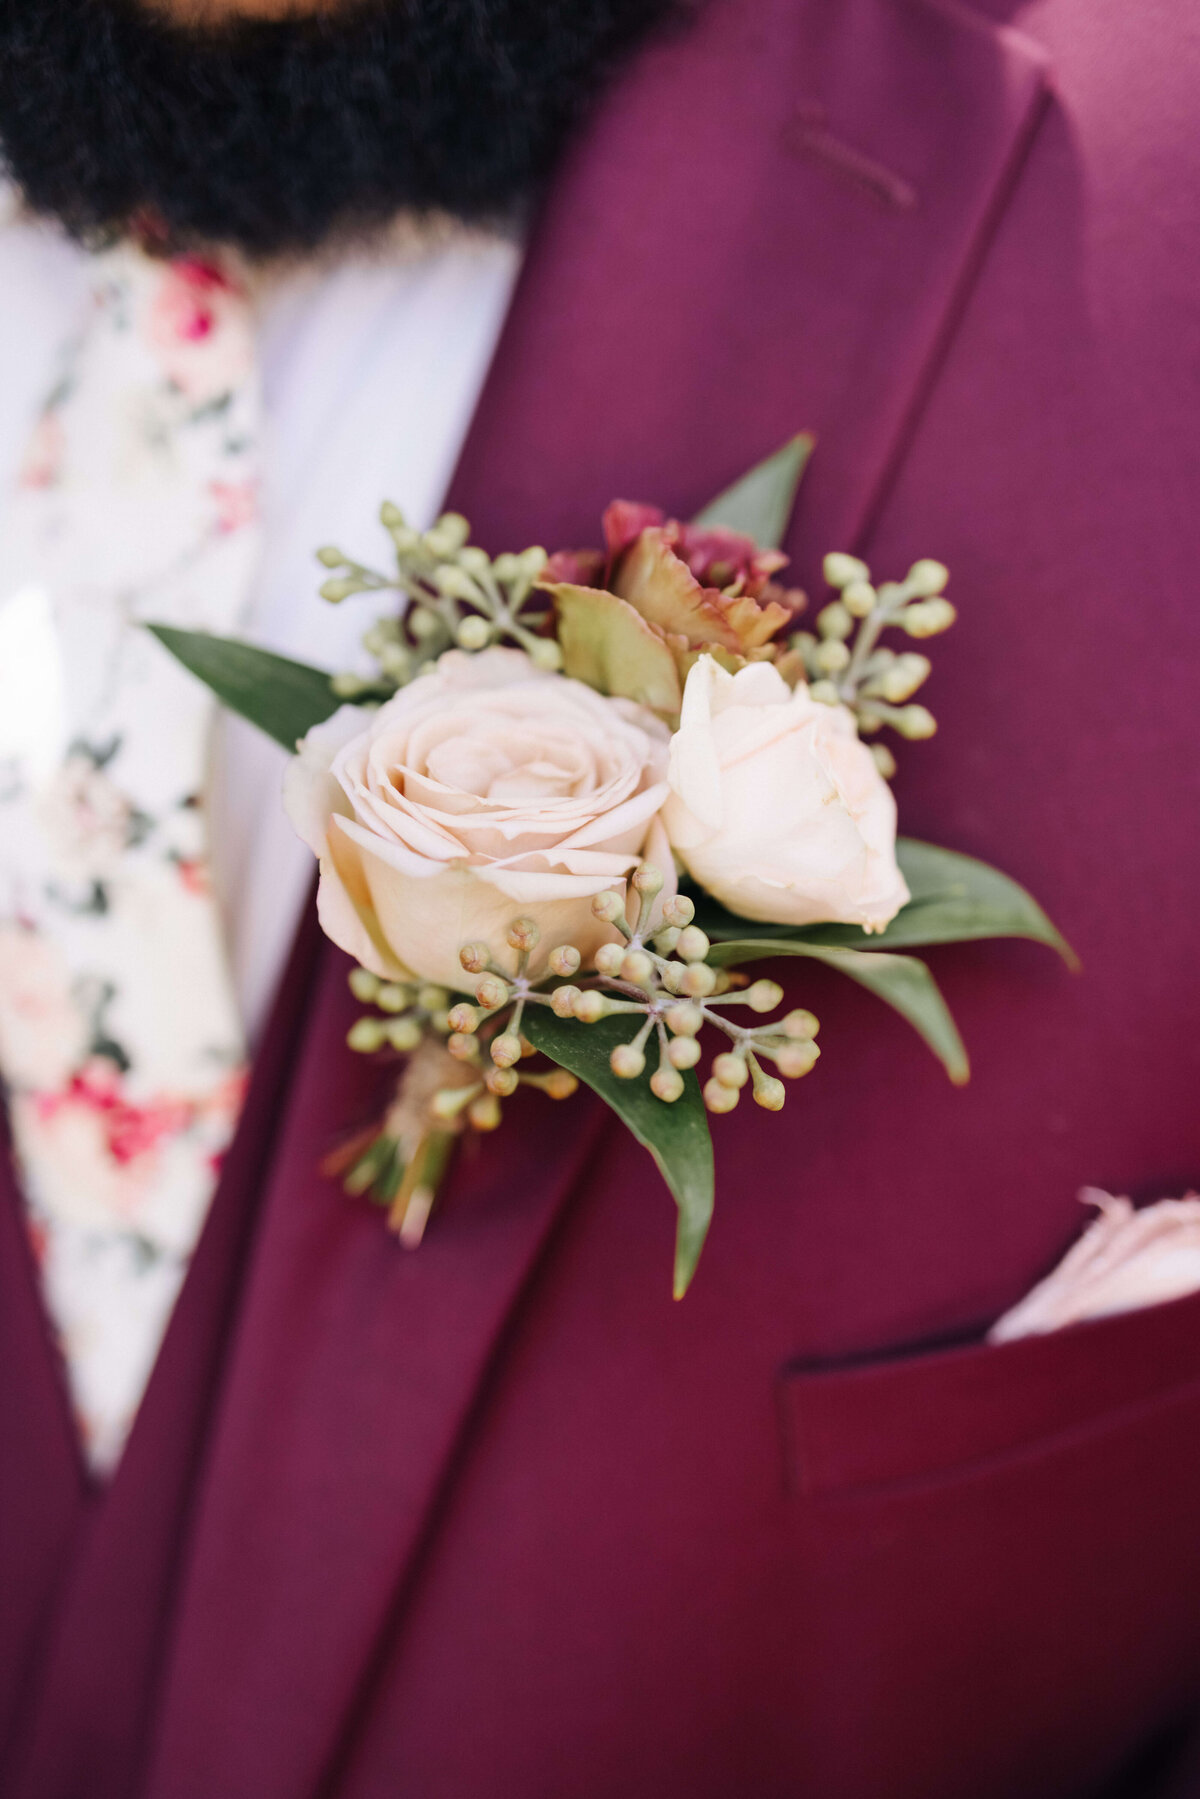 A grooms boutonniere and floral patterned tie